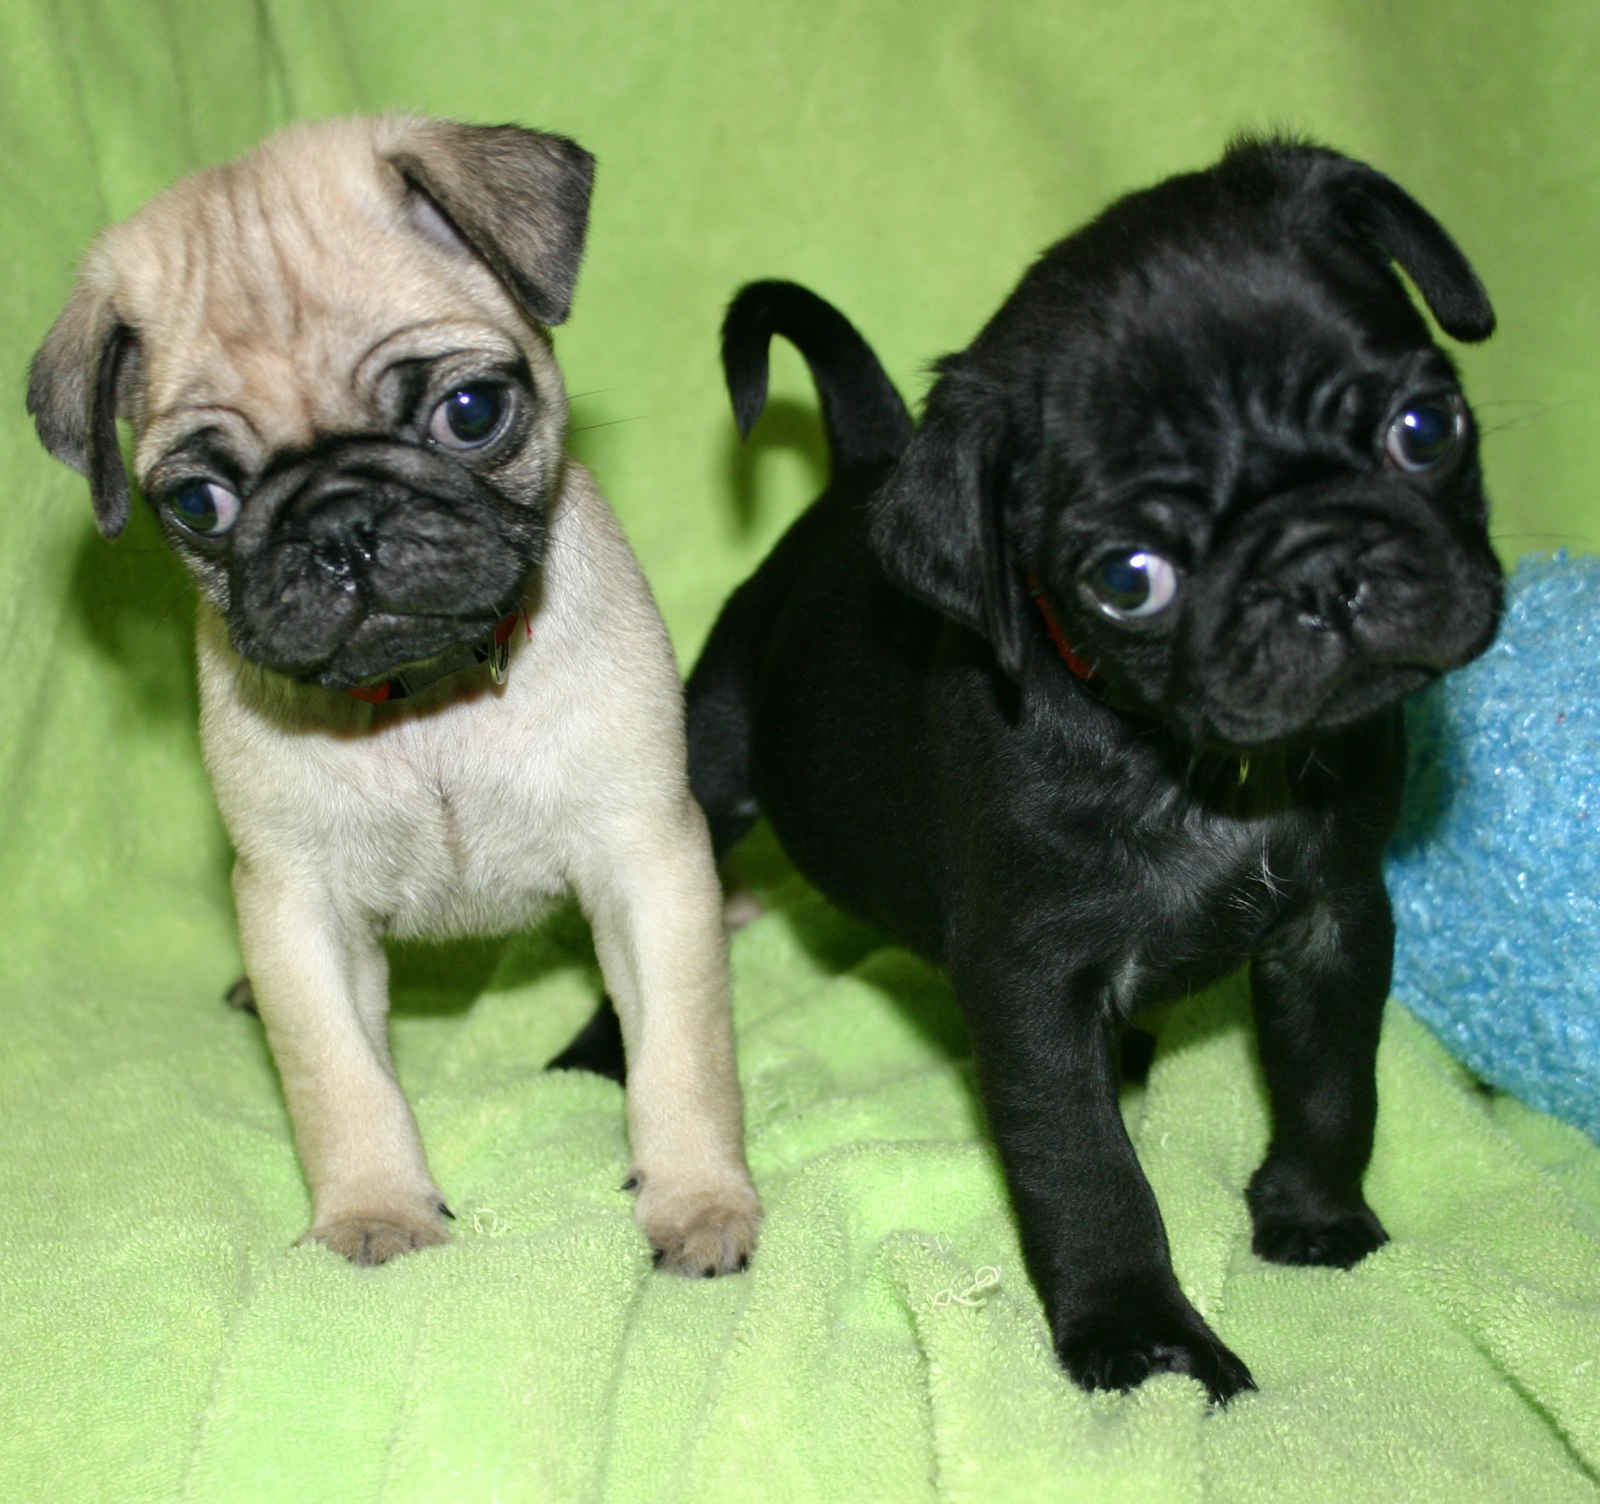 Toy Dog Puppies Pictures